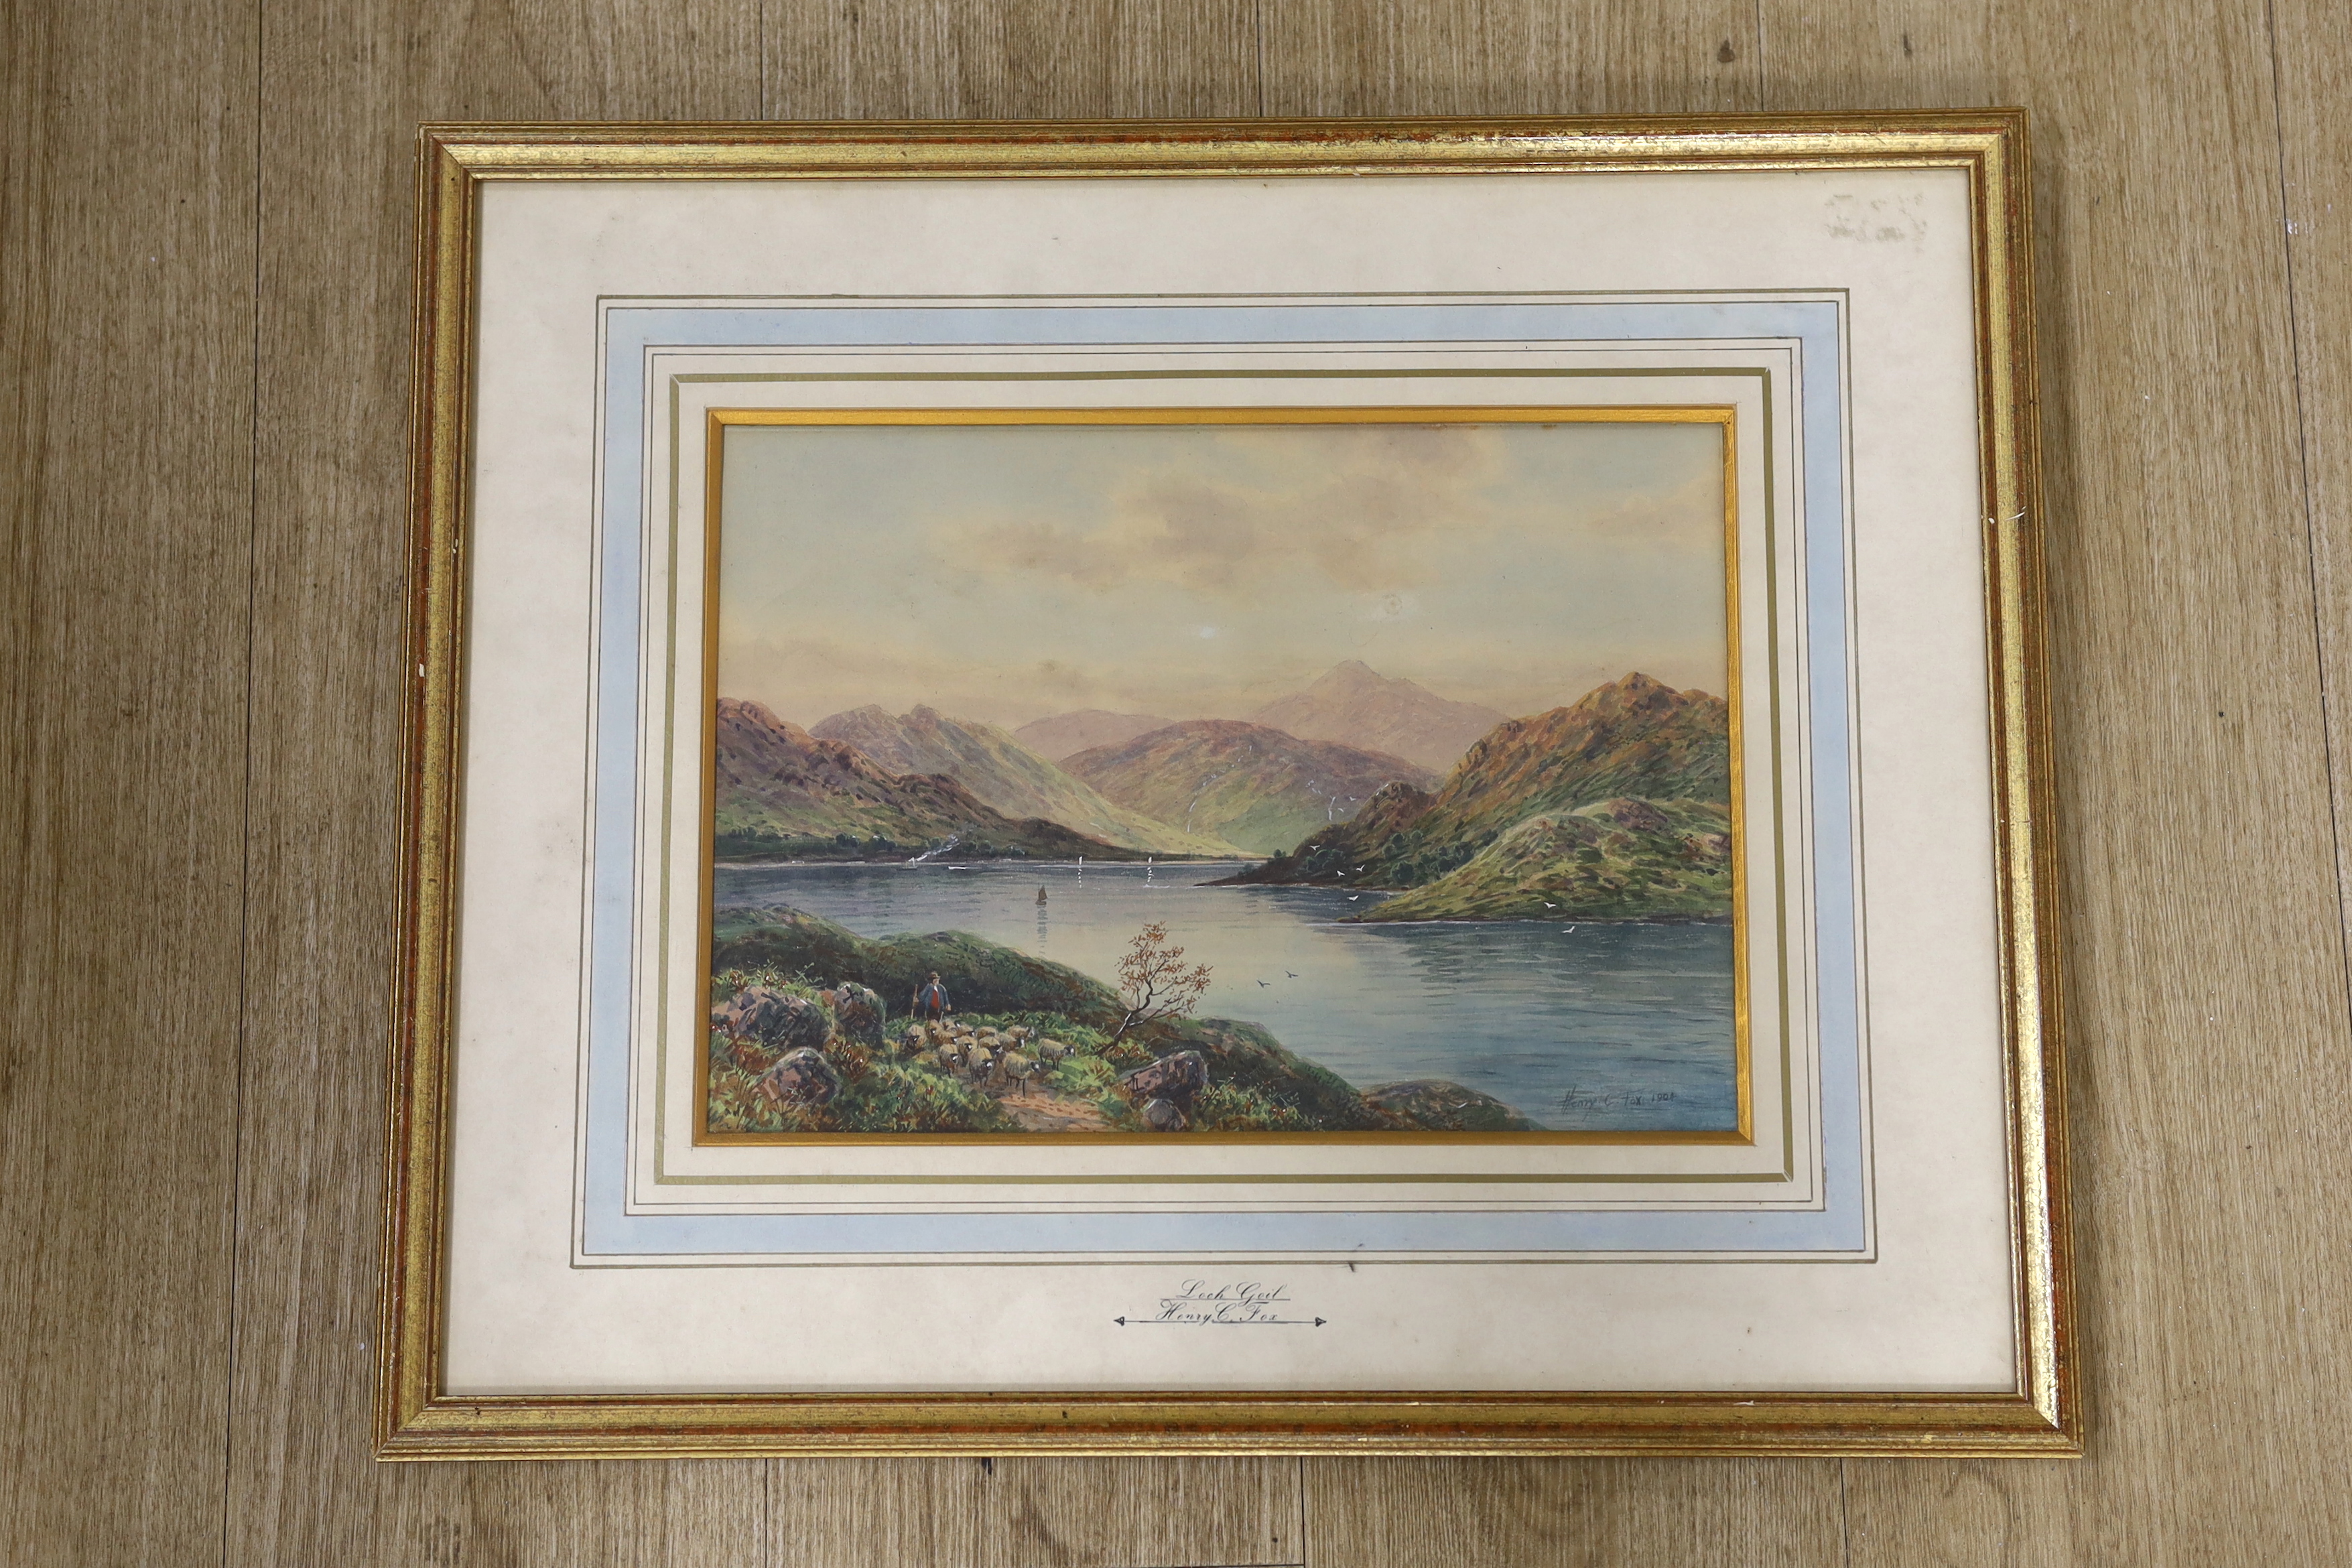 Henry Charles Fox (1860-1925), watercolour, 'Loch Gail', signed and dated 1904, 24 x 35cm